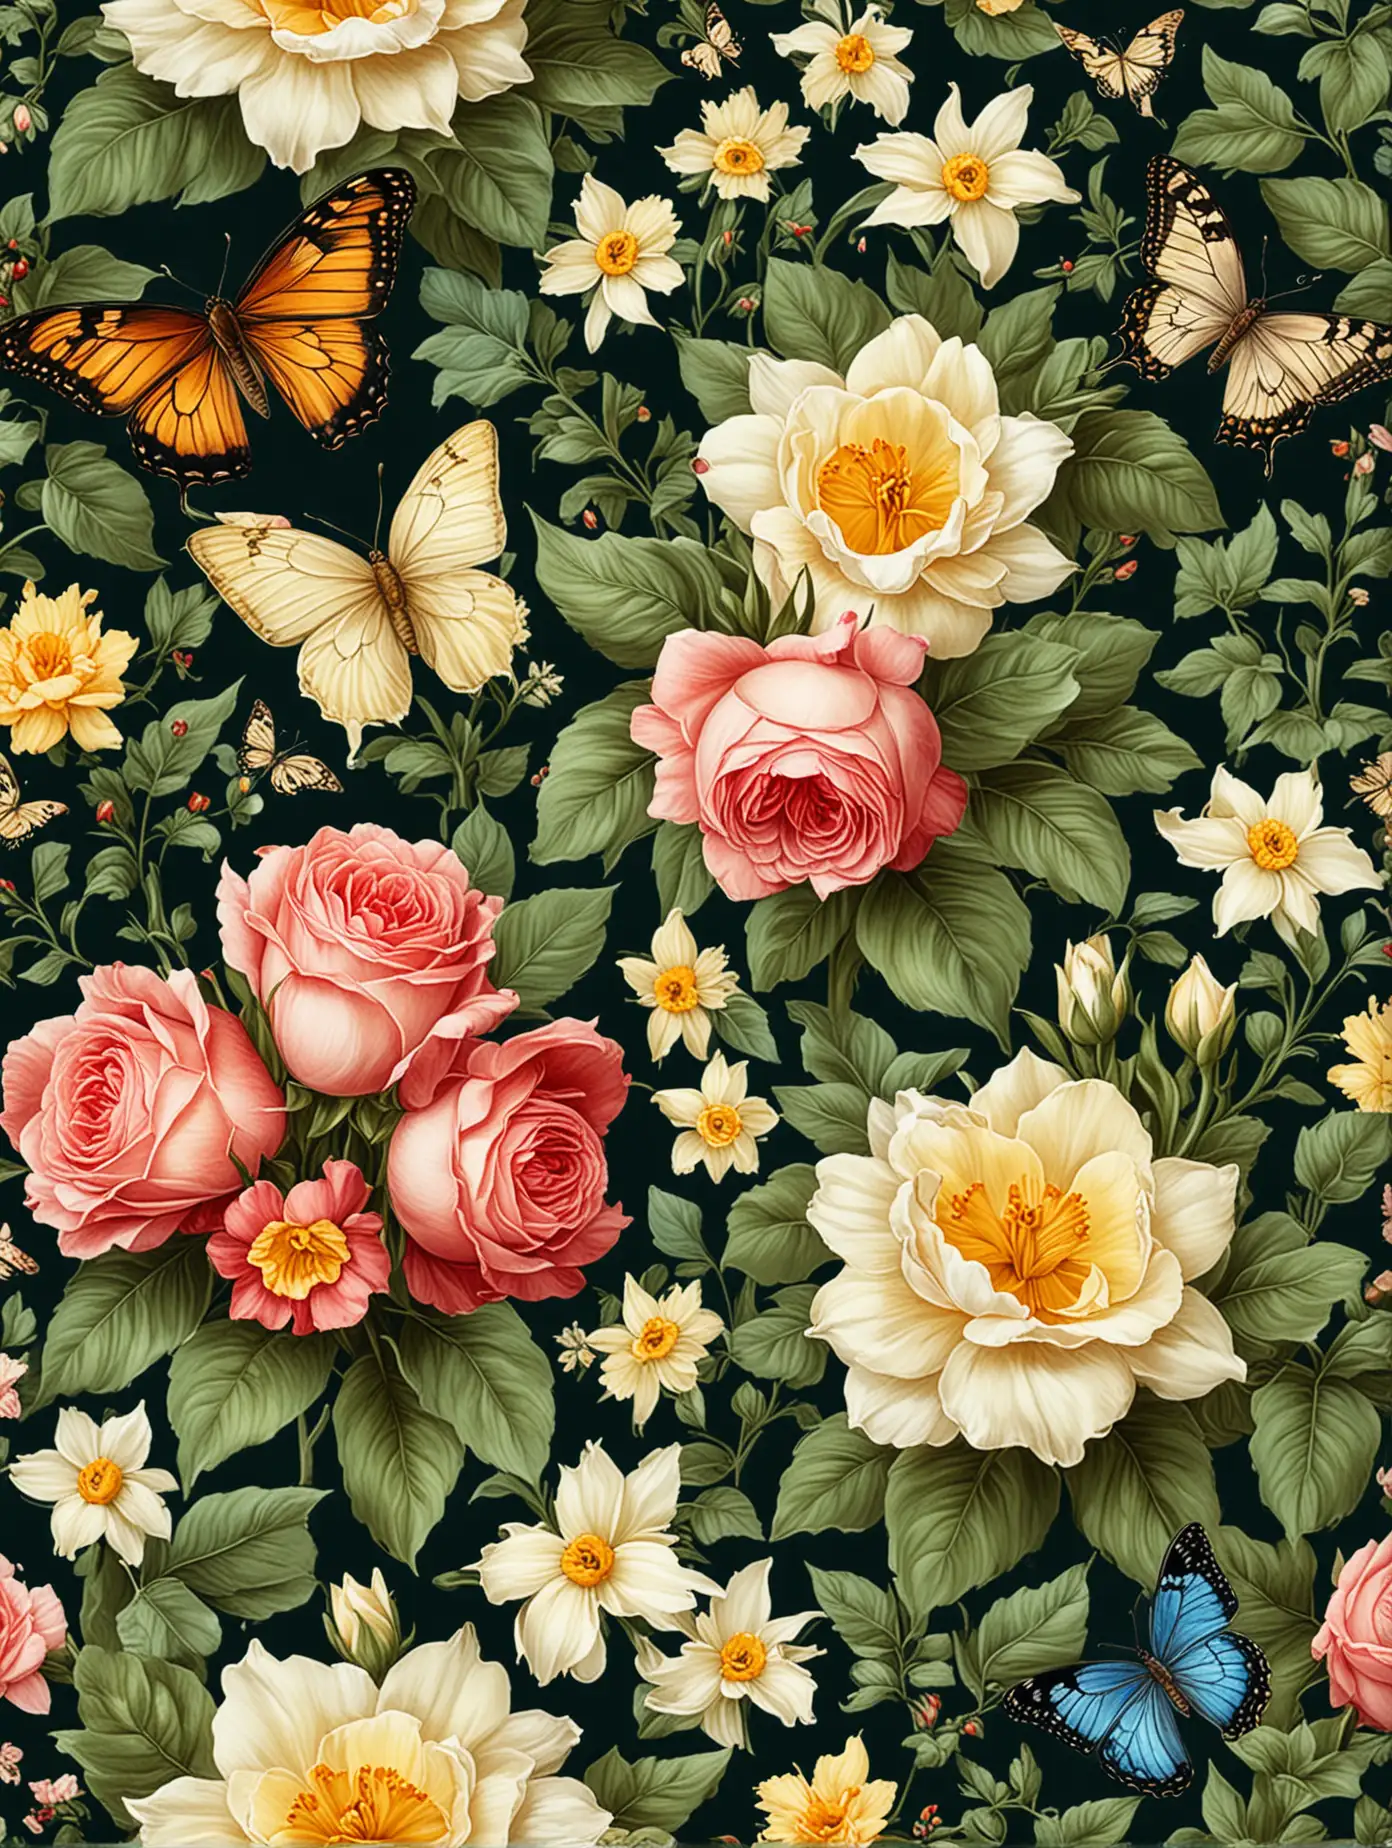 Floral Wallpaper Pattern with Roses Clovers Butterflies and Daffodils